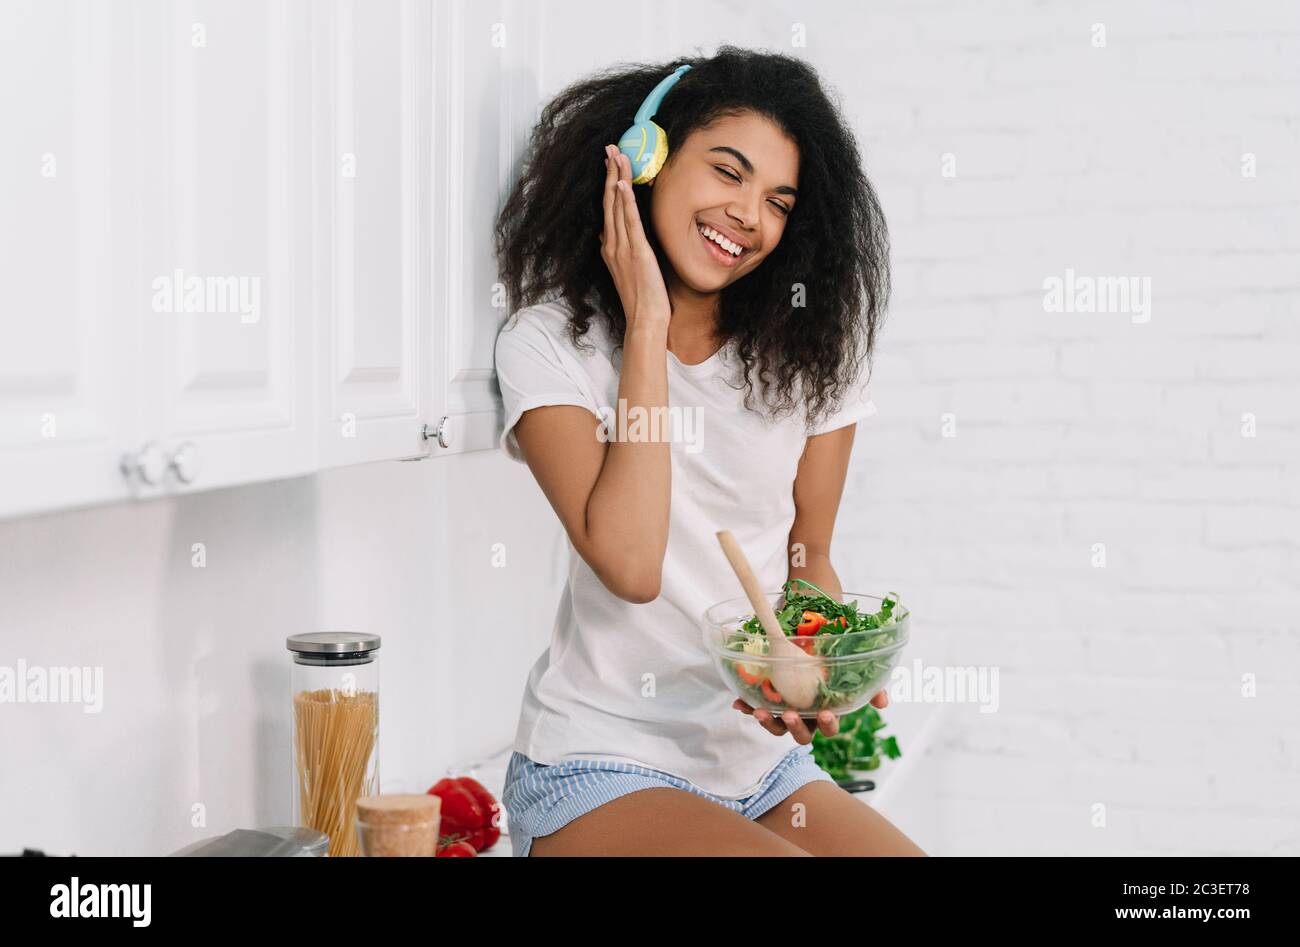 Happy emotional girl holding bawl with fresh salad, listening music at home, laughing Stock Photo